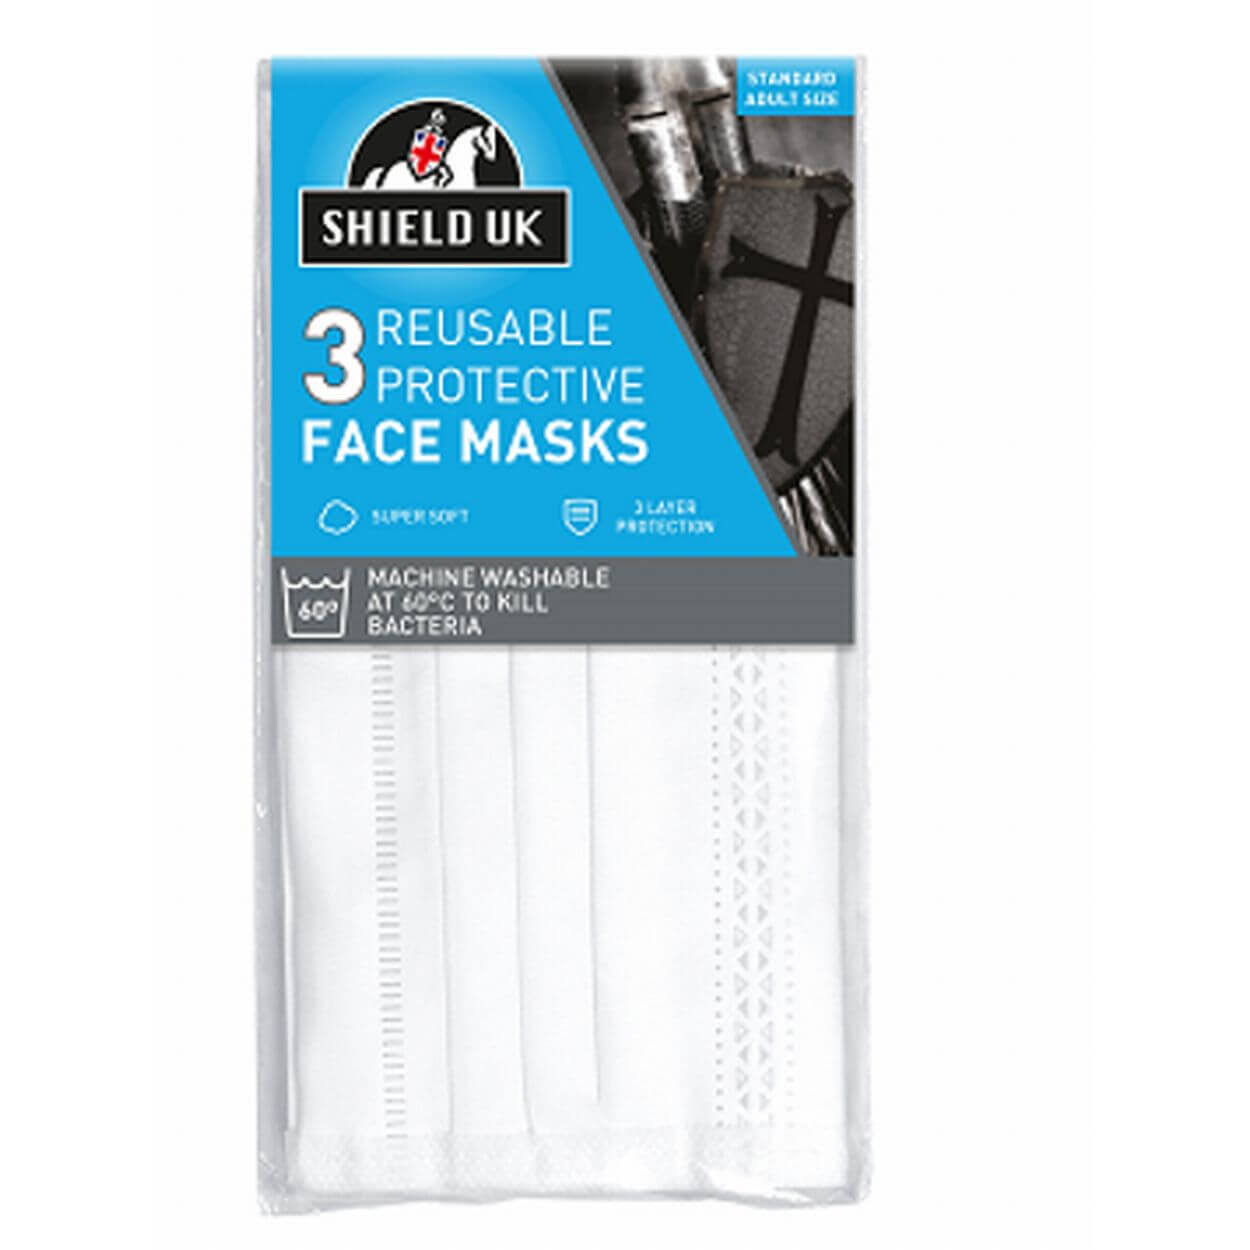 3 Pack Reusable/Washable Protective Face Masks, White